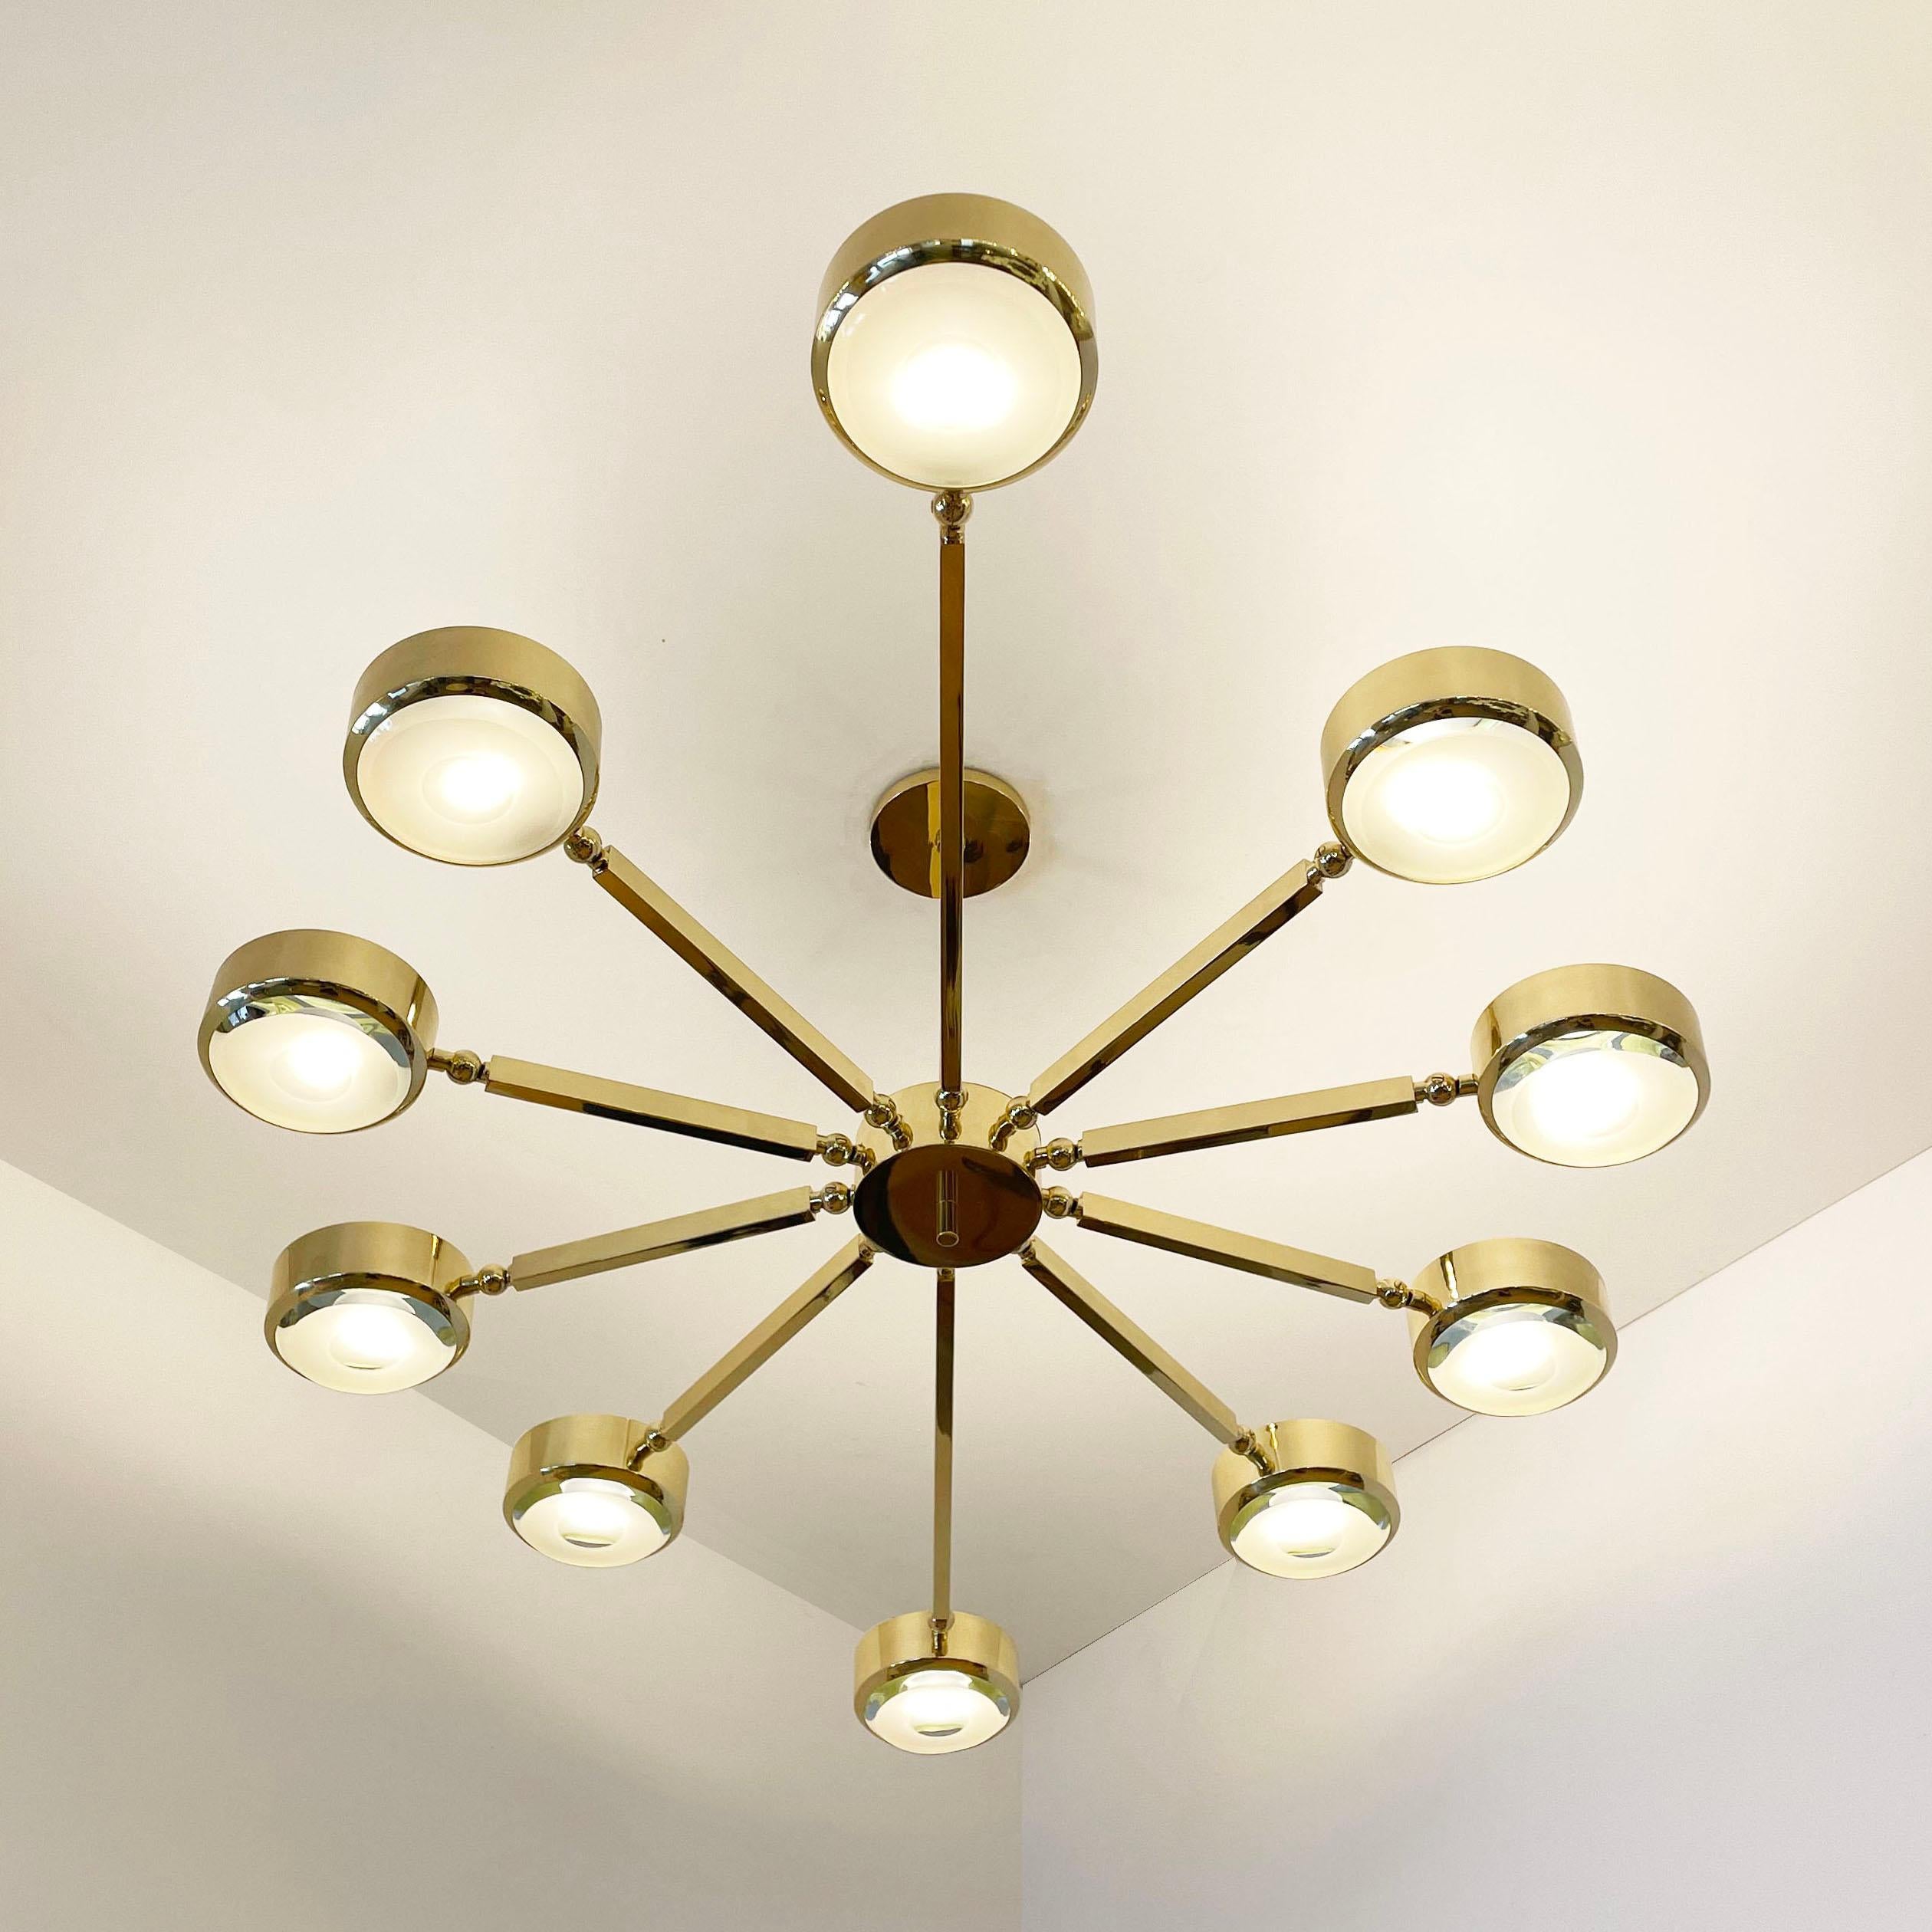 Contemporary Oculus Oval Ceiling Light by Gaspare Asaro- Polished Brass with Carved Glass For Sale